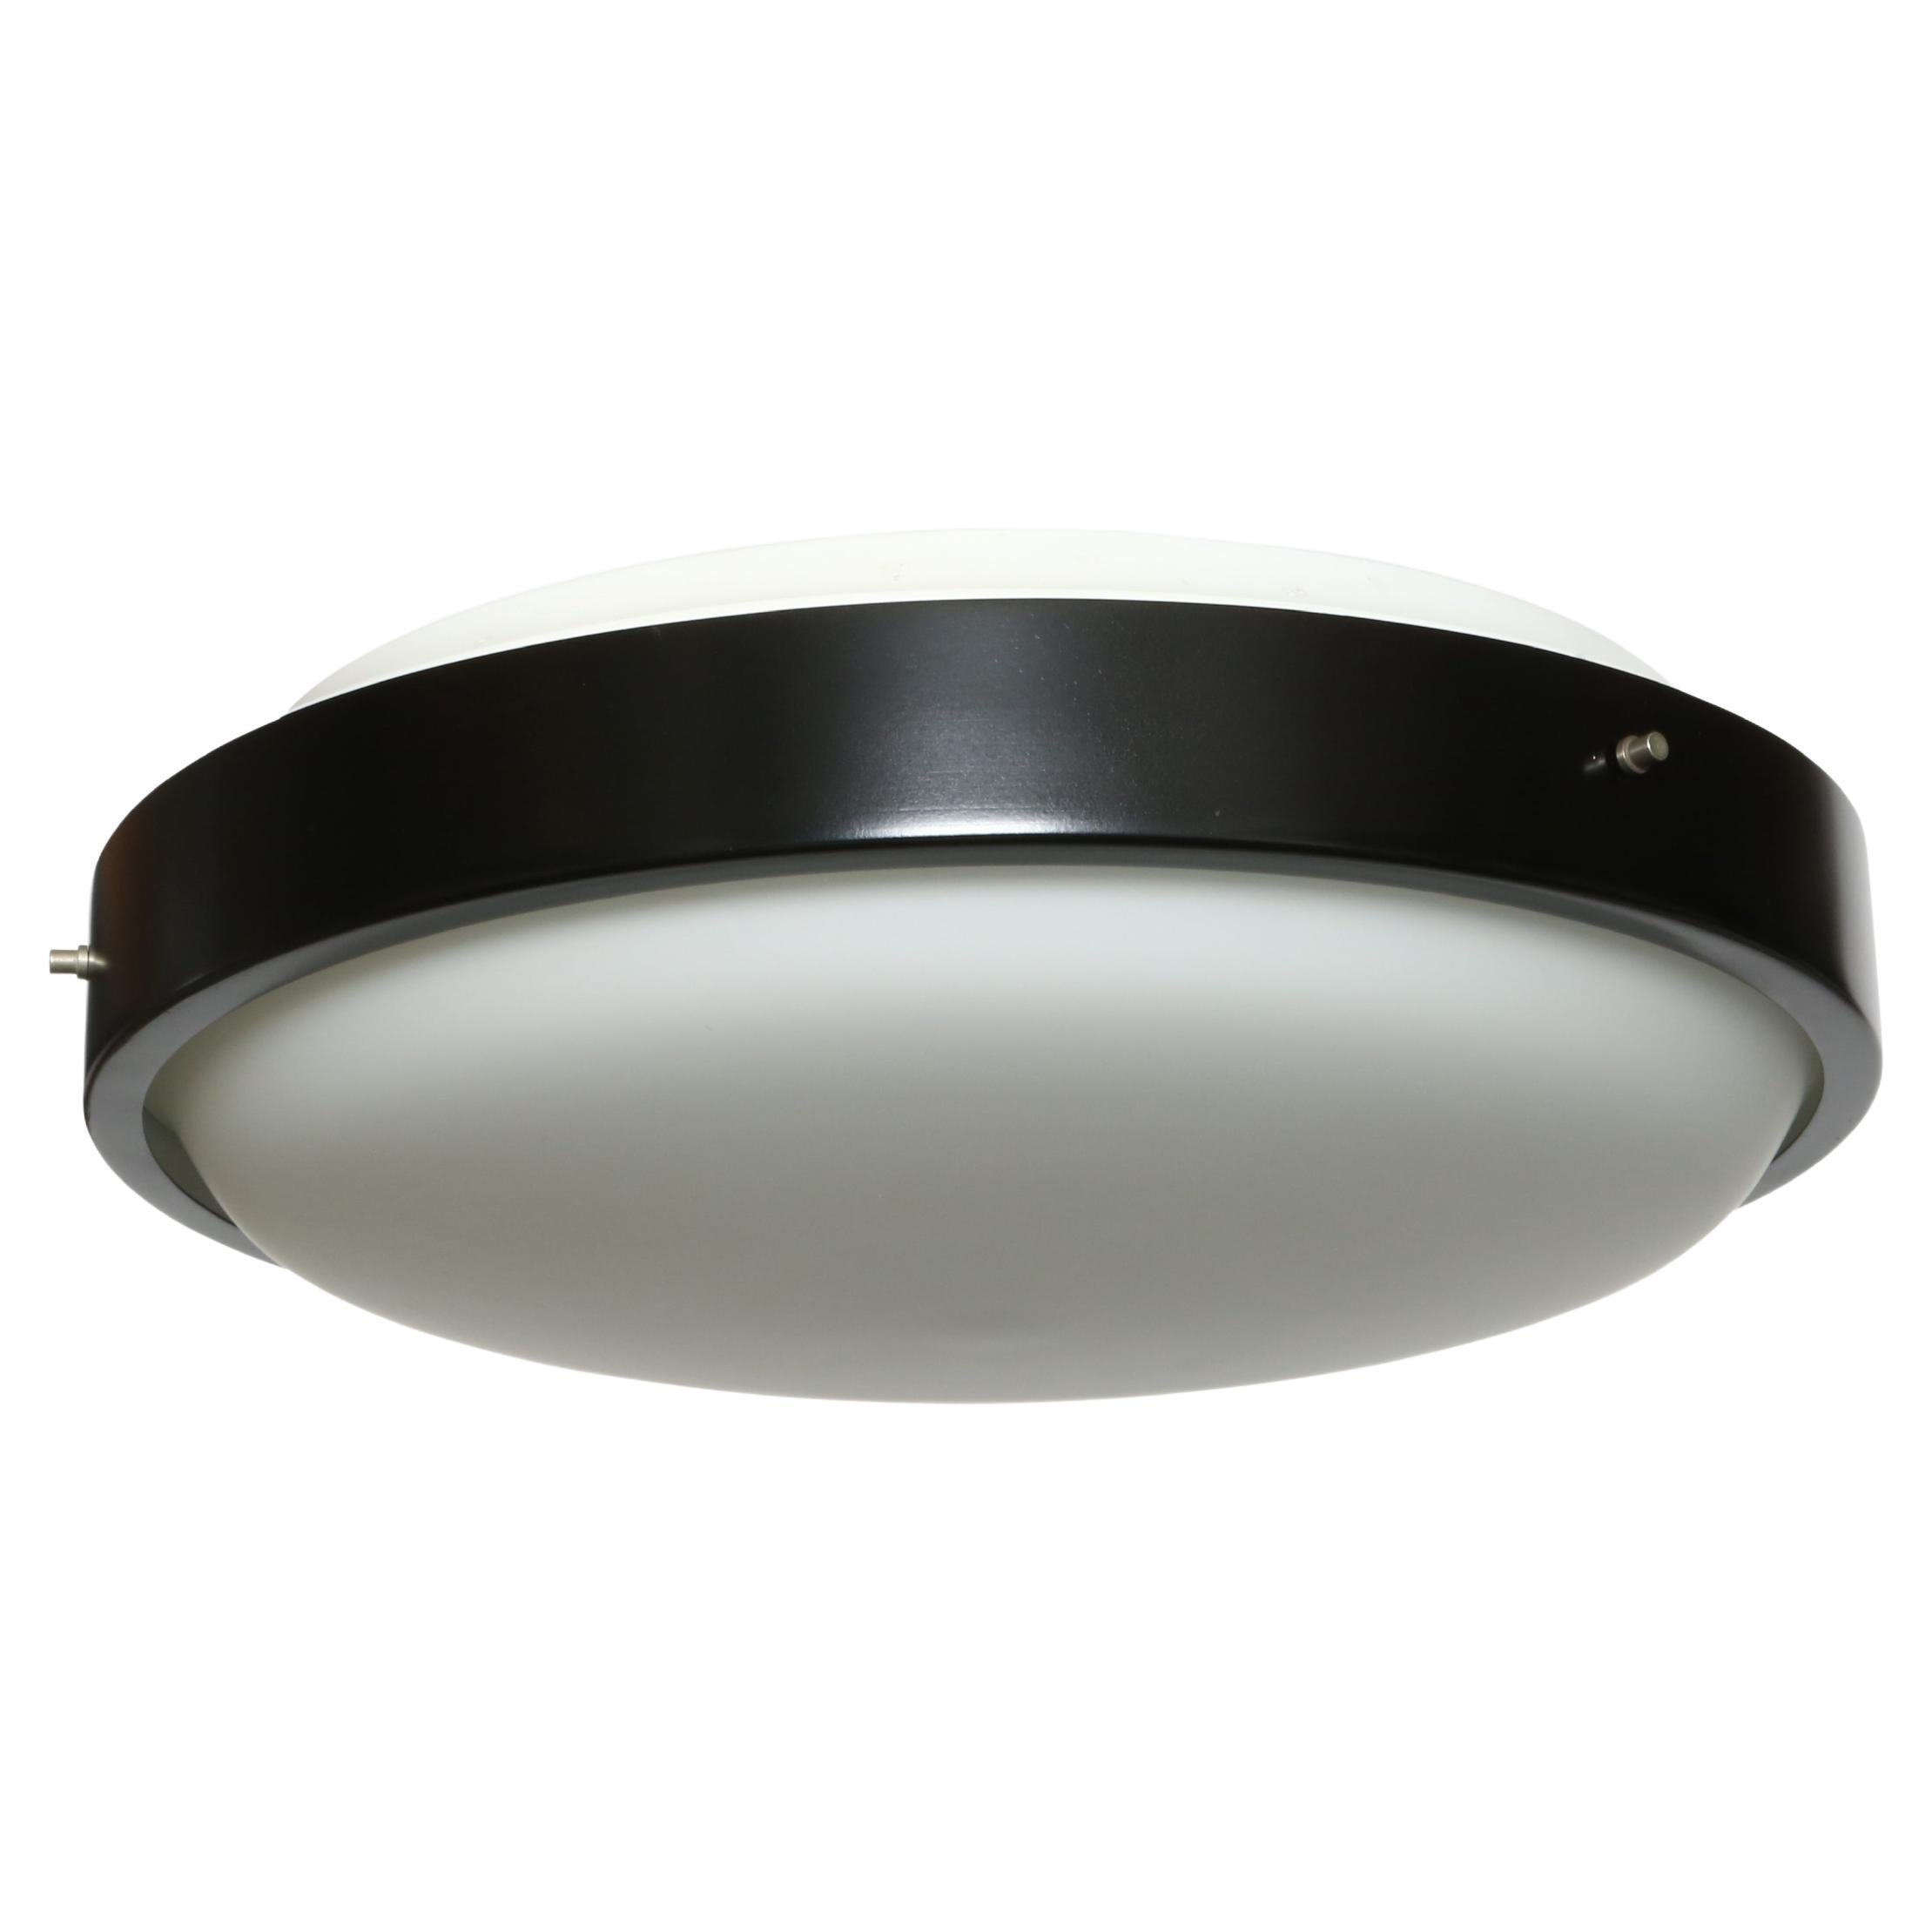 Oscar Torlasco for Lumi flush mount ceiling light.
Designed and manufactured in Italy, 1950s
